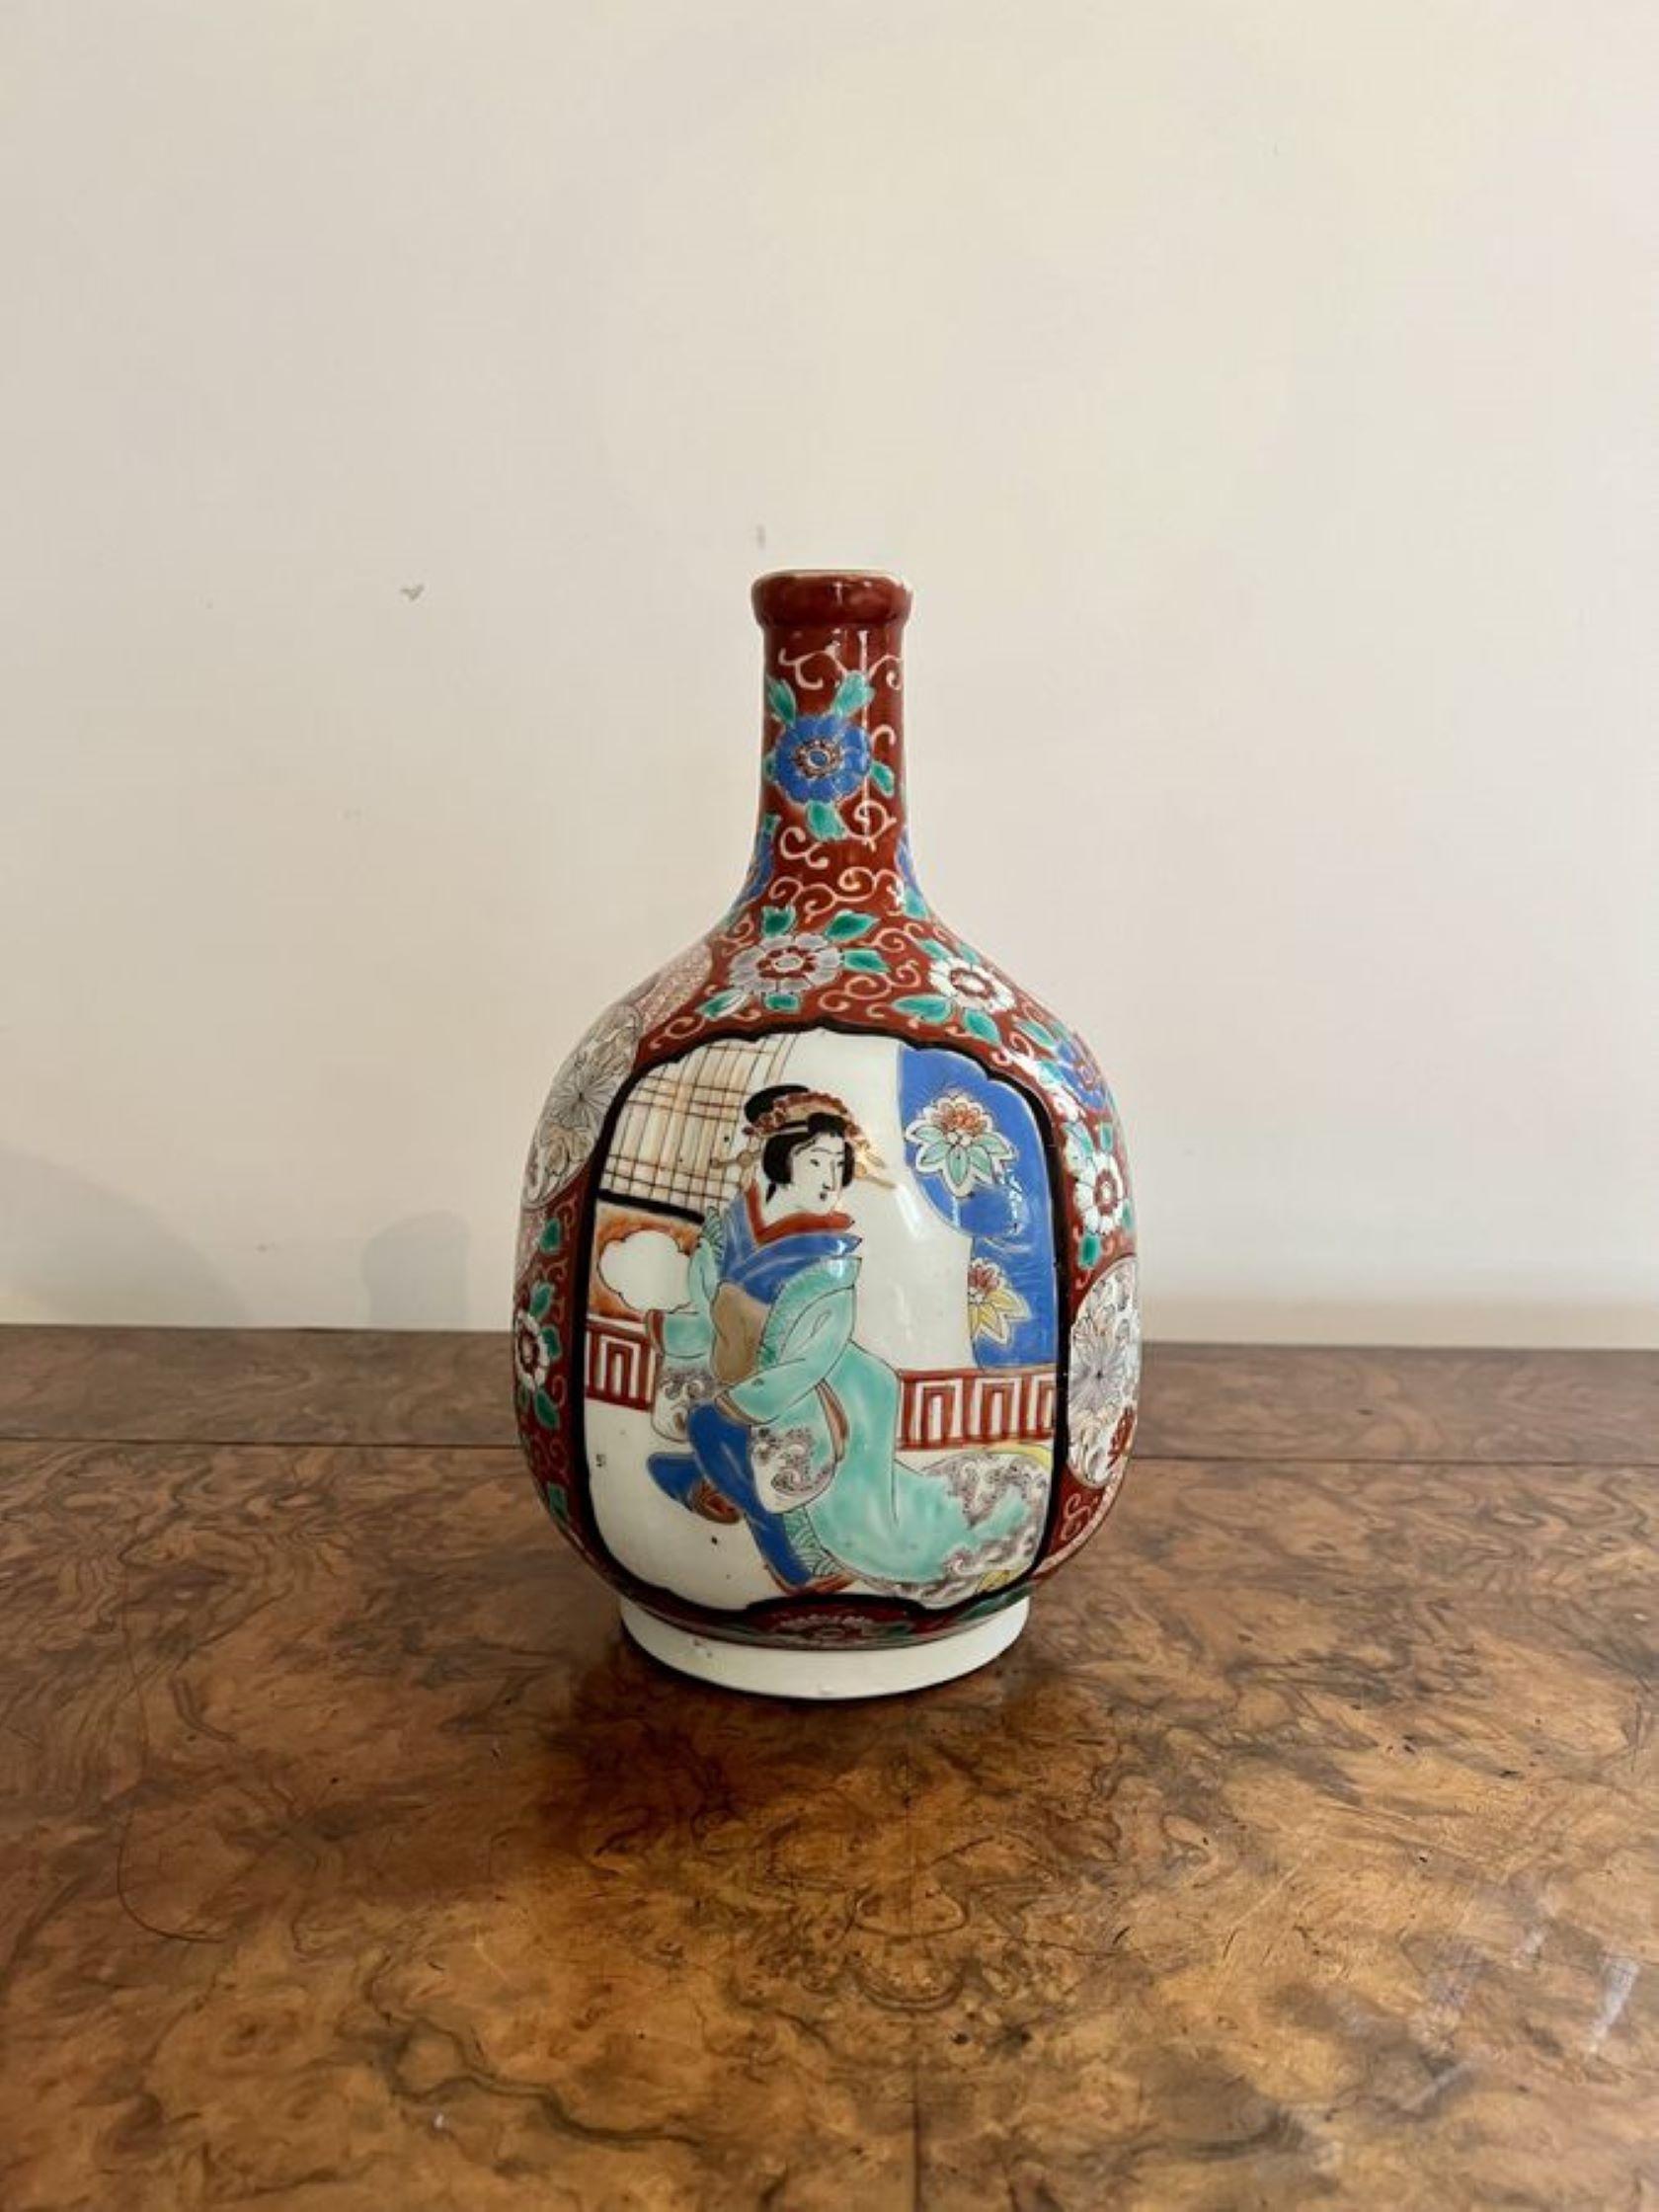 Quality pair of antique Japanese imari shaped vases, having a quality pair of antique Japanese porcelain vases, having a slender neck above a bulbous body, enamel decorated with Samurai within a cartouche on red ground, decorated with flowers and